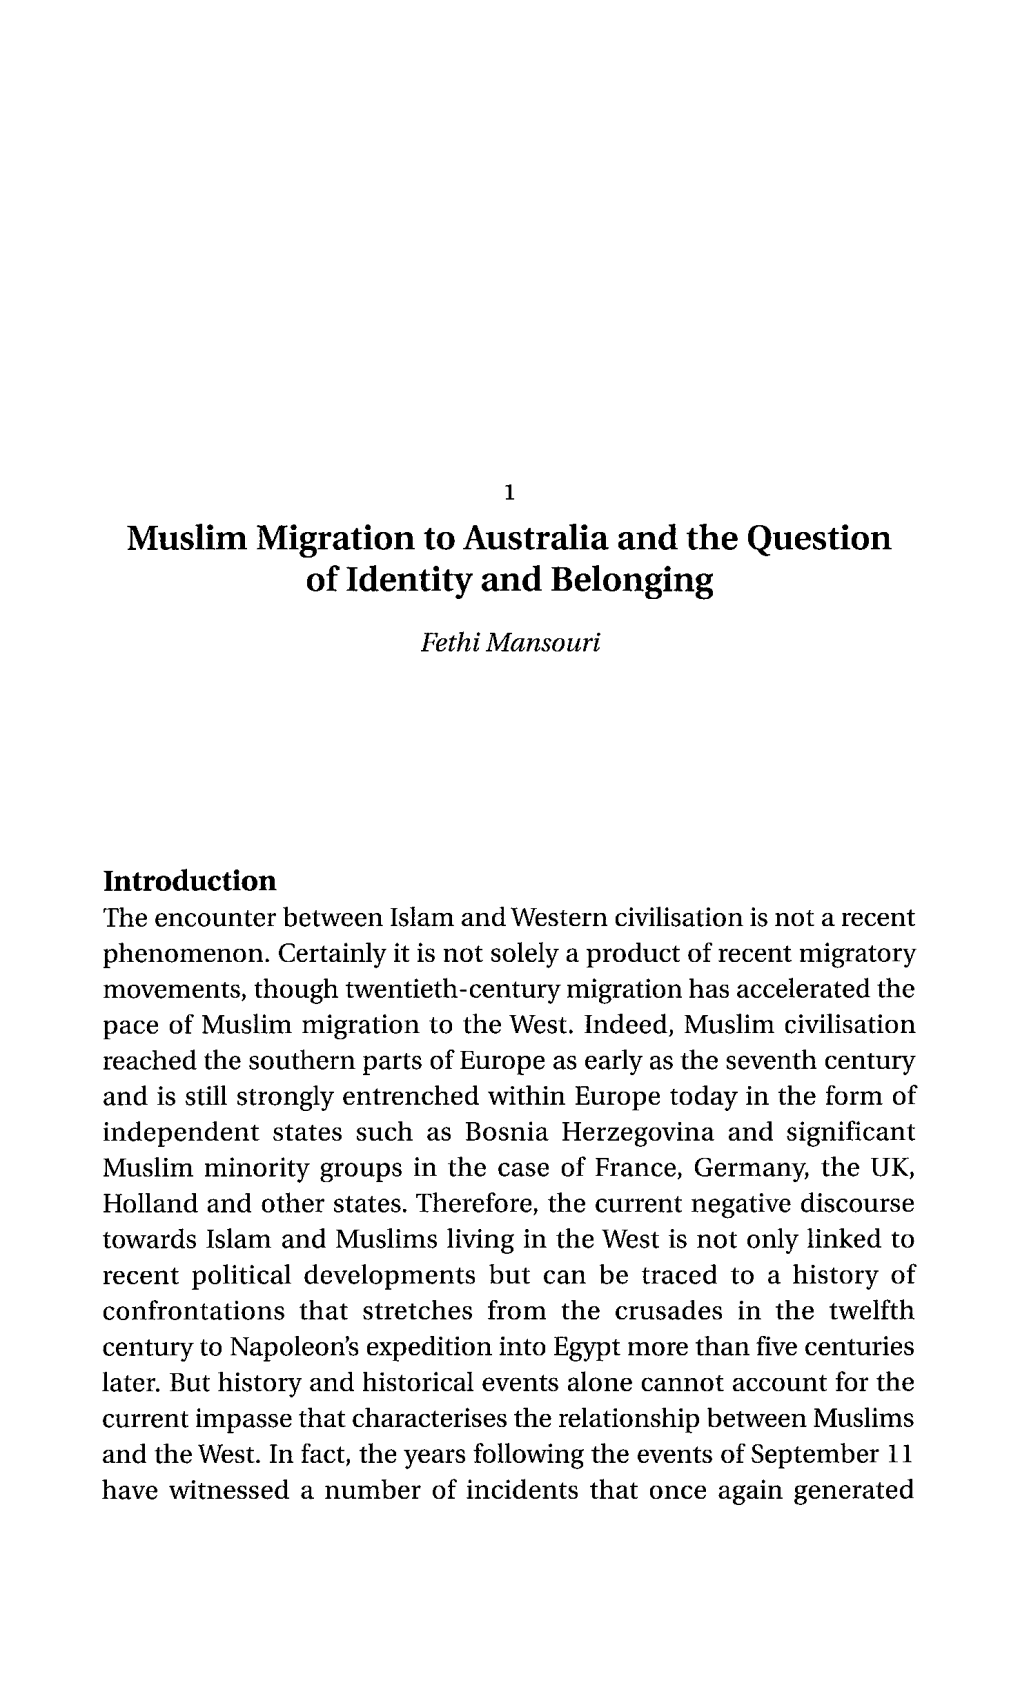 Muslim Migration to Australia and the Question of Identity and Belonging